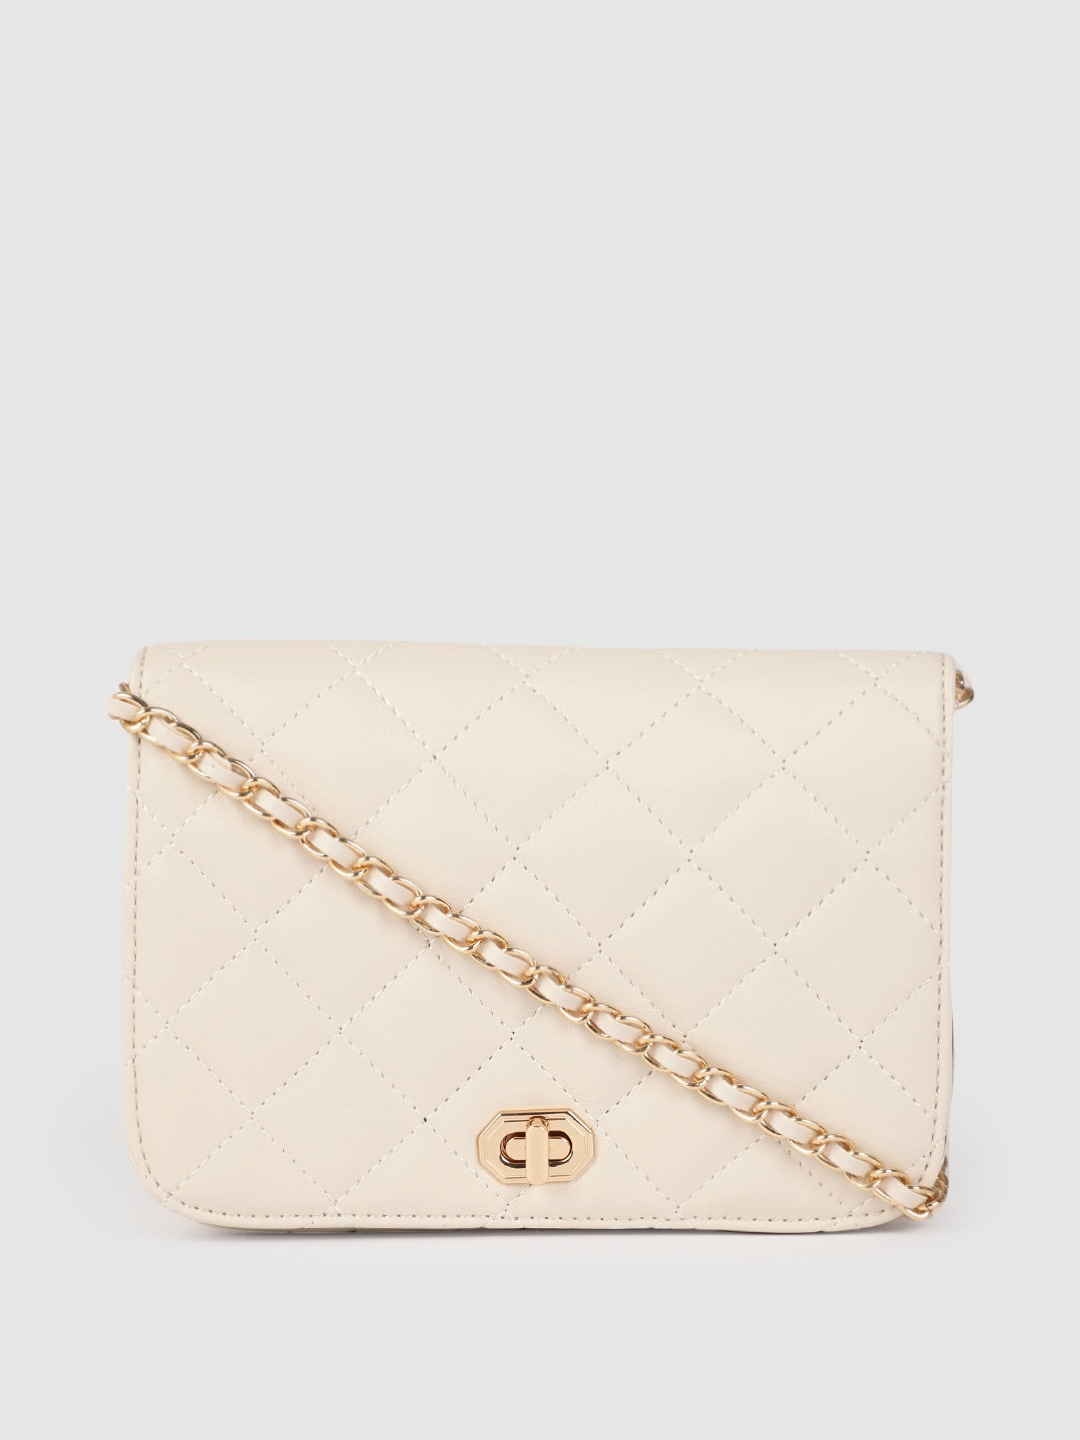 Accessorize Cream-Coloured Quilted Sling Bag Price in India